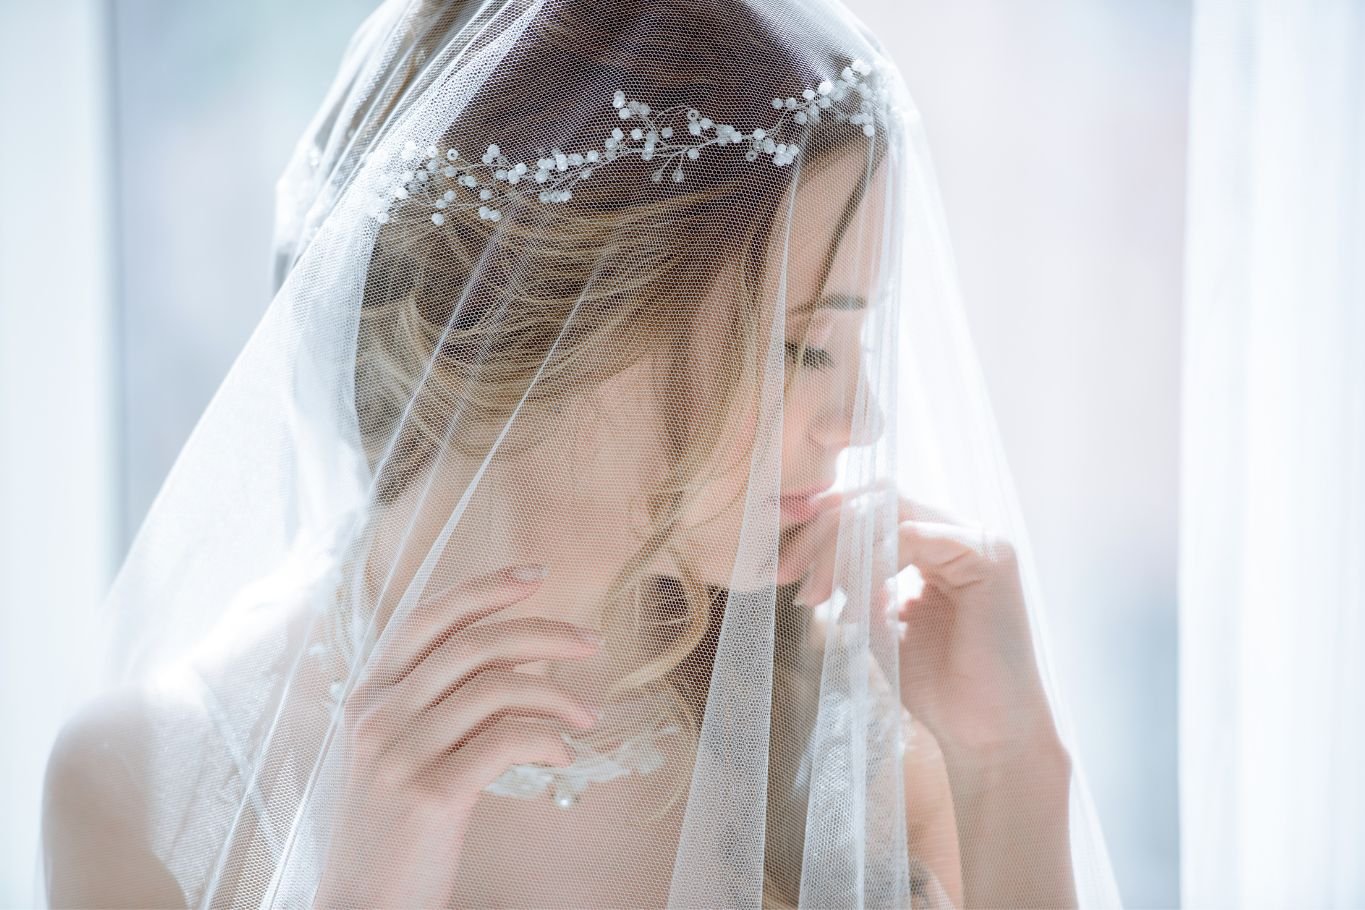 Hairpiece vs. Veil: Which Is Right for You?